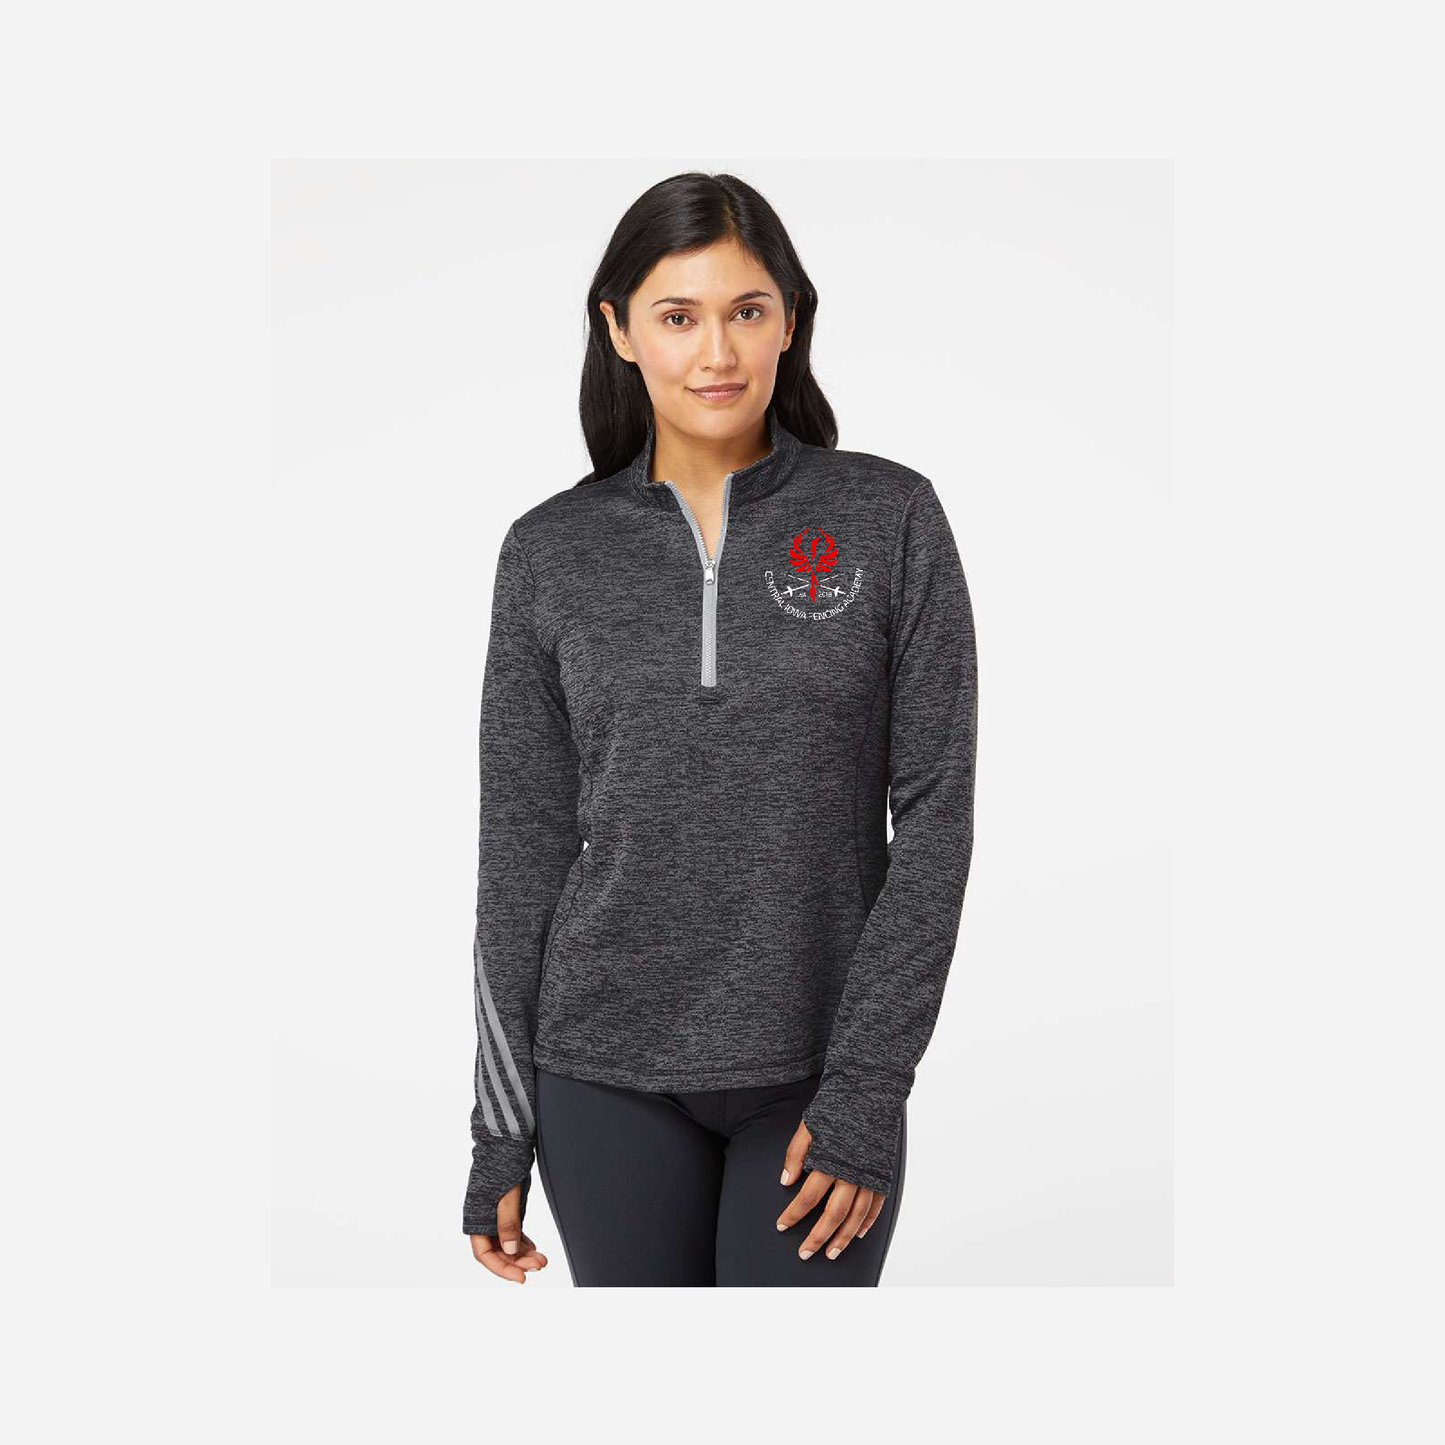 CIFA Adidas Women's Brushed Terry Quarter-Zip Pullover